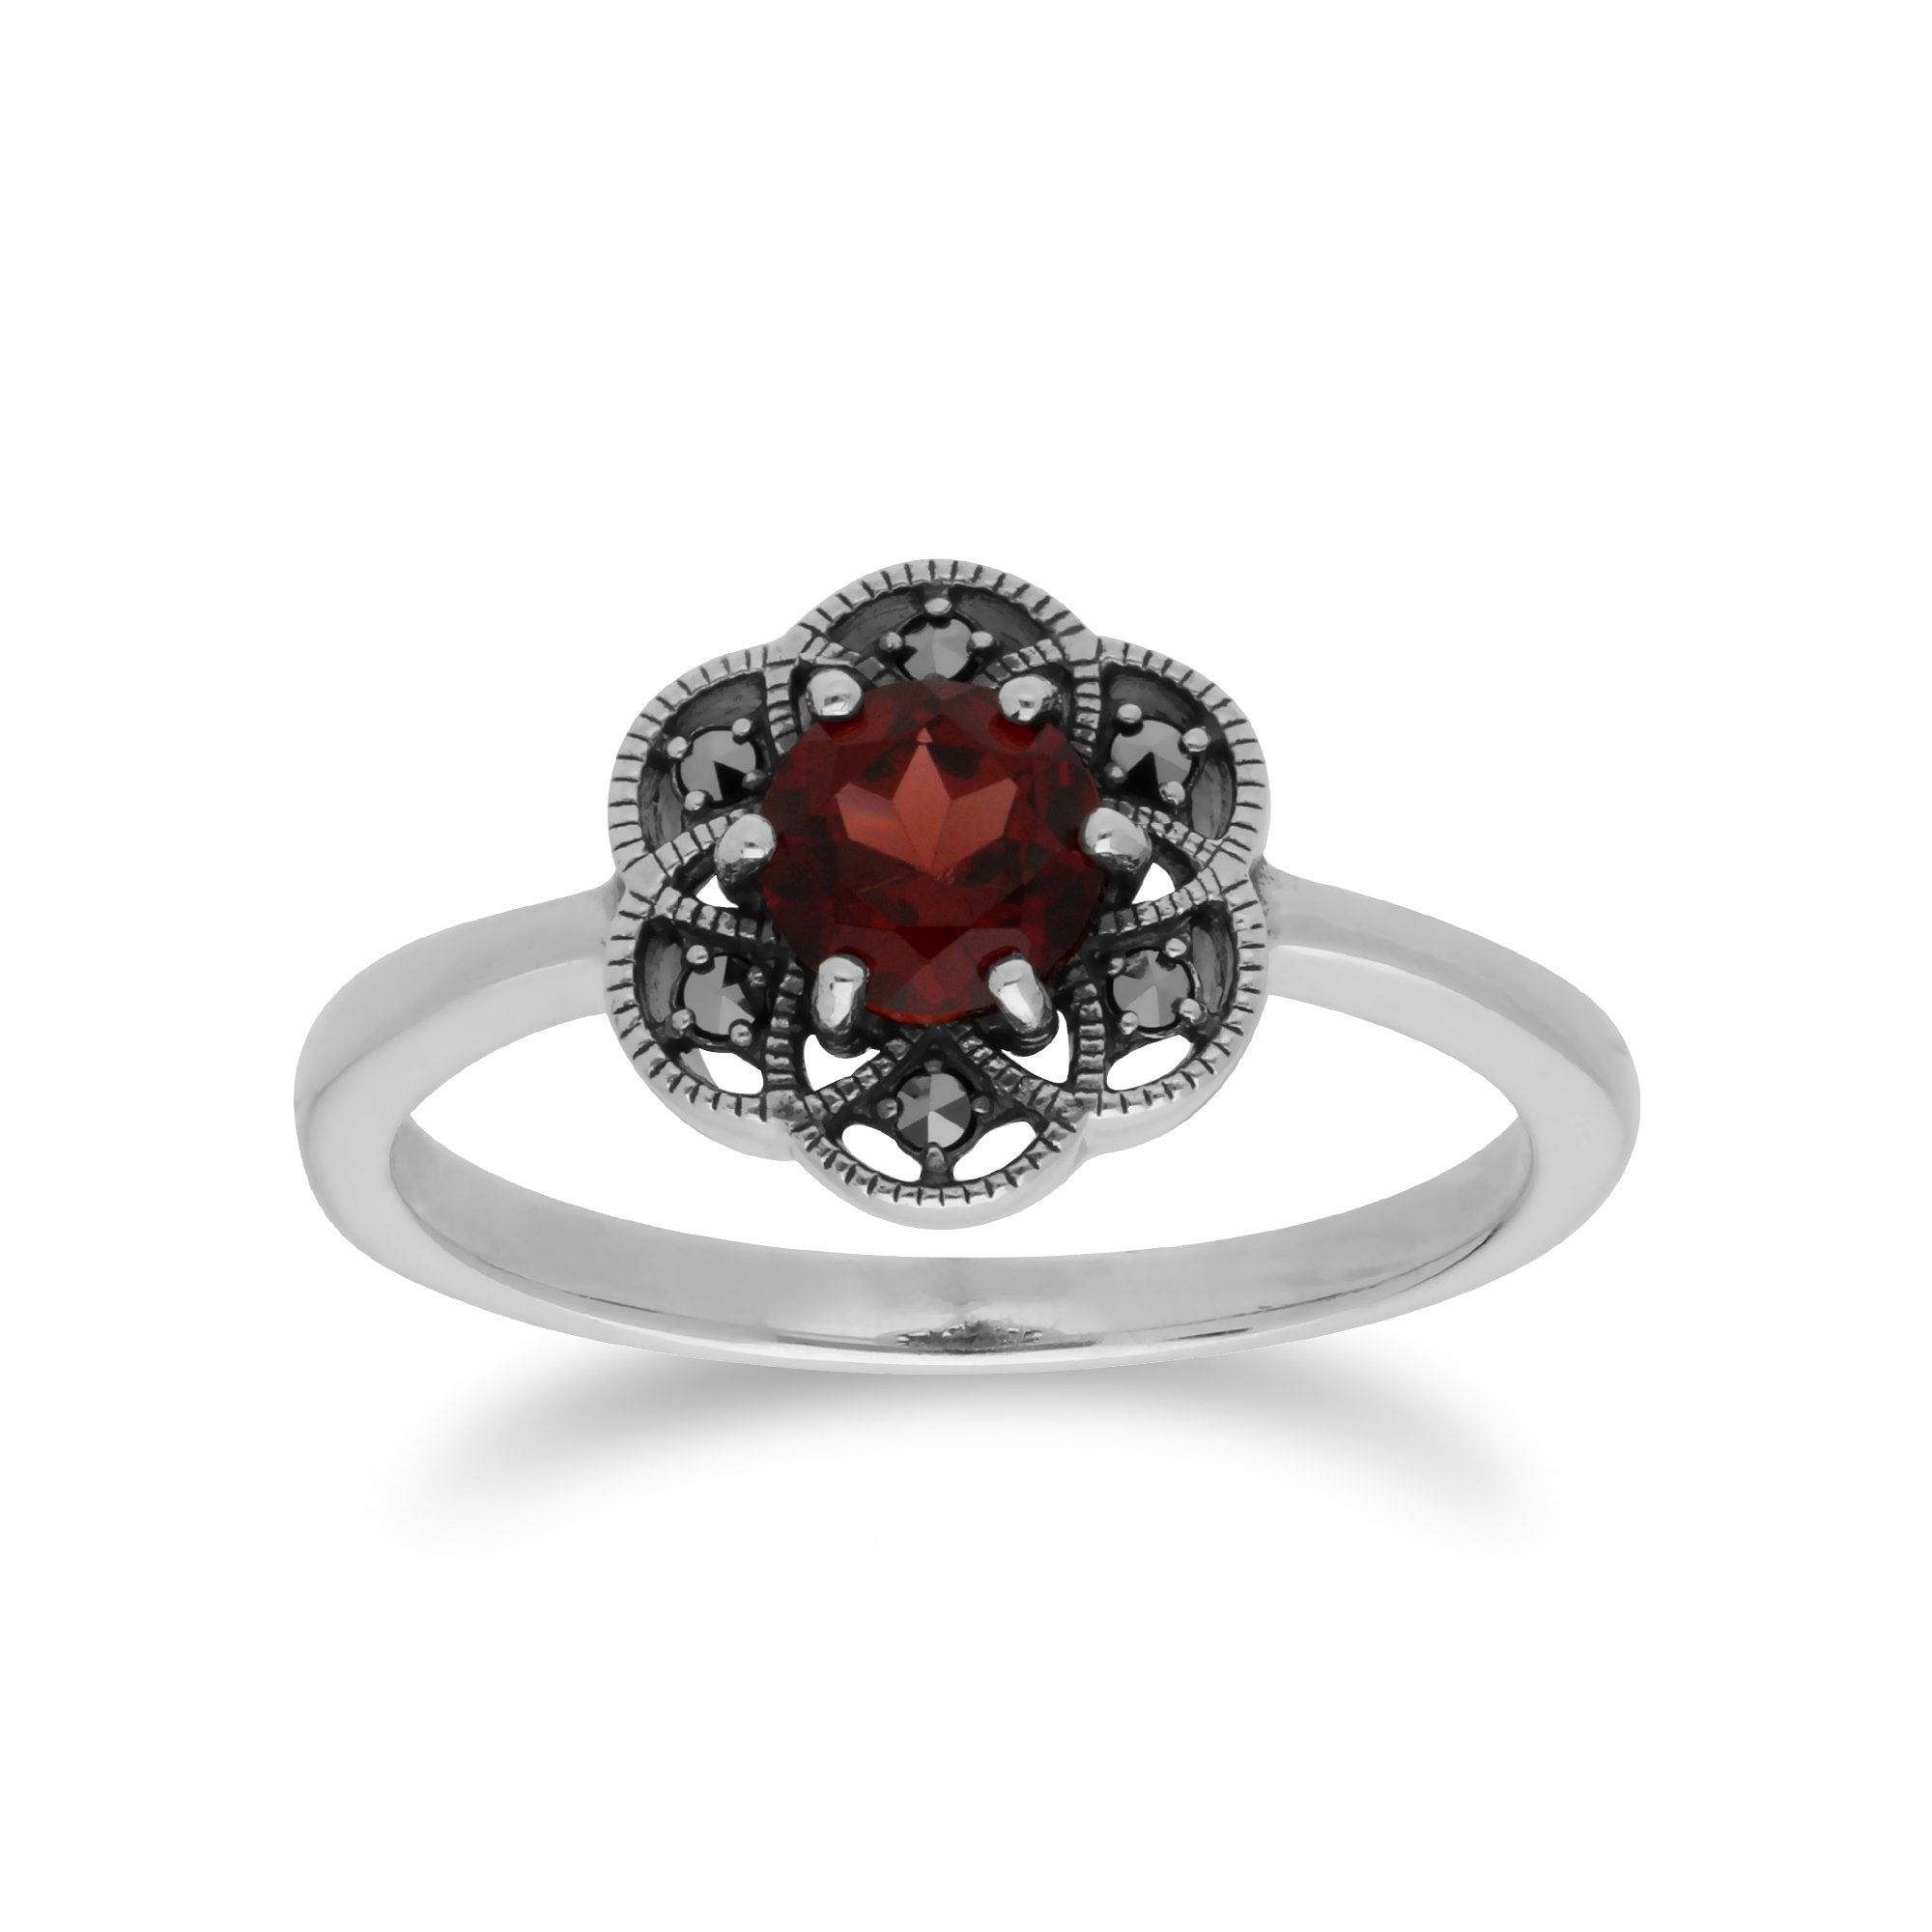 Floral Round Garnet & Marcasite Daisy Ring in 925 Sterling Silver